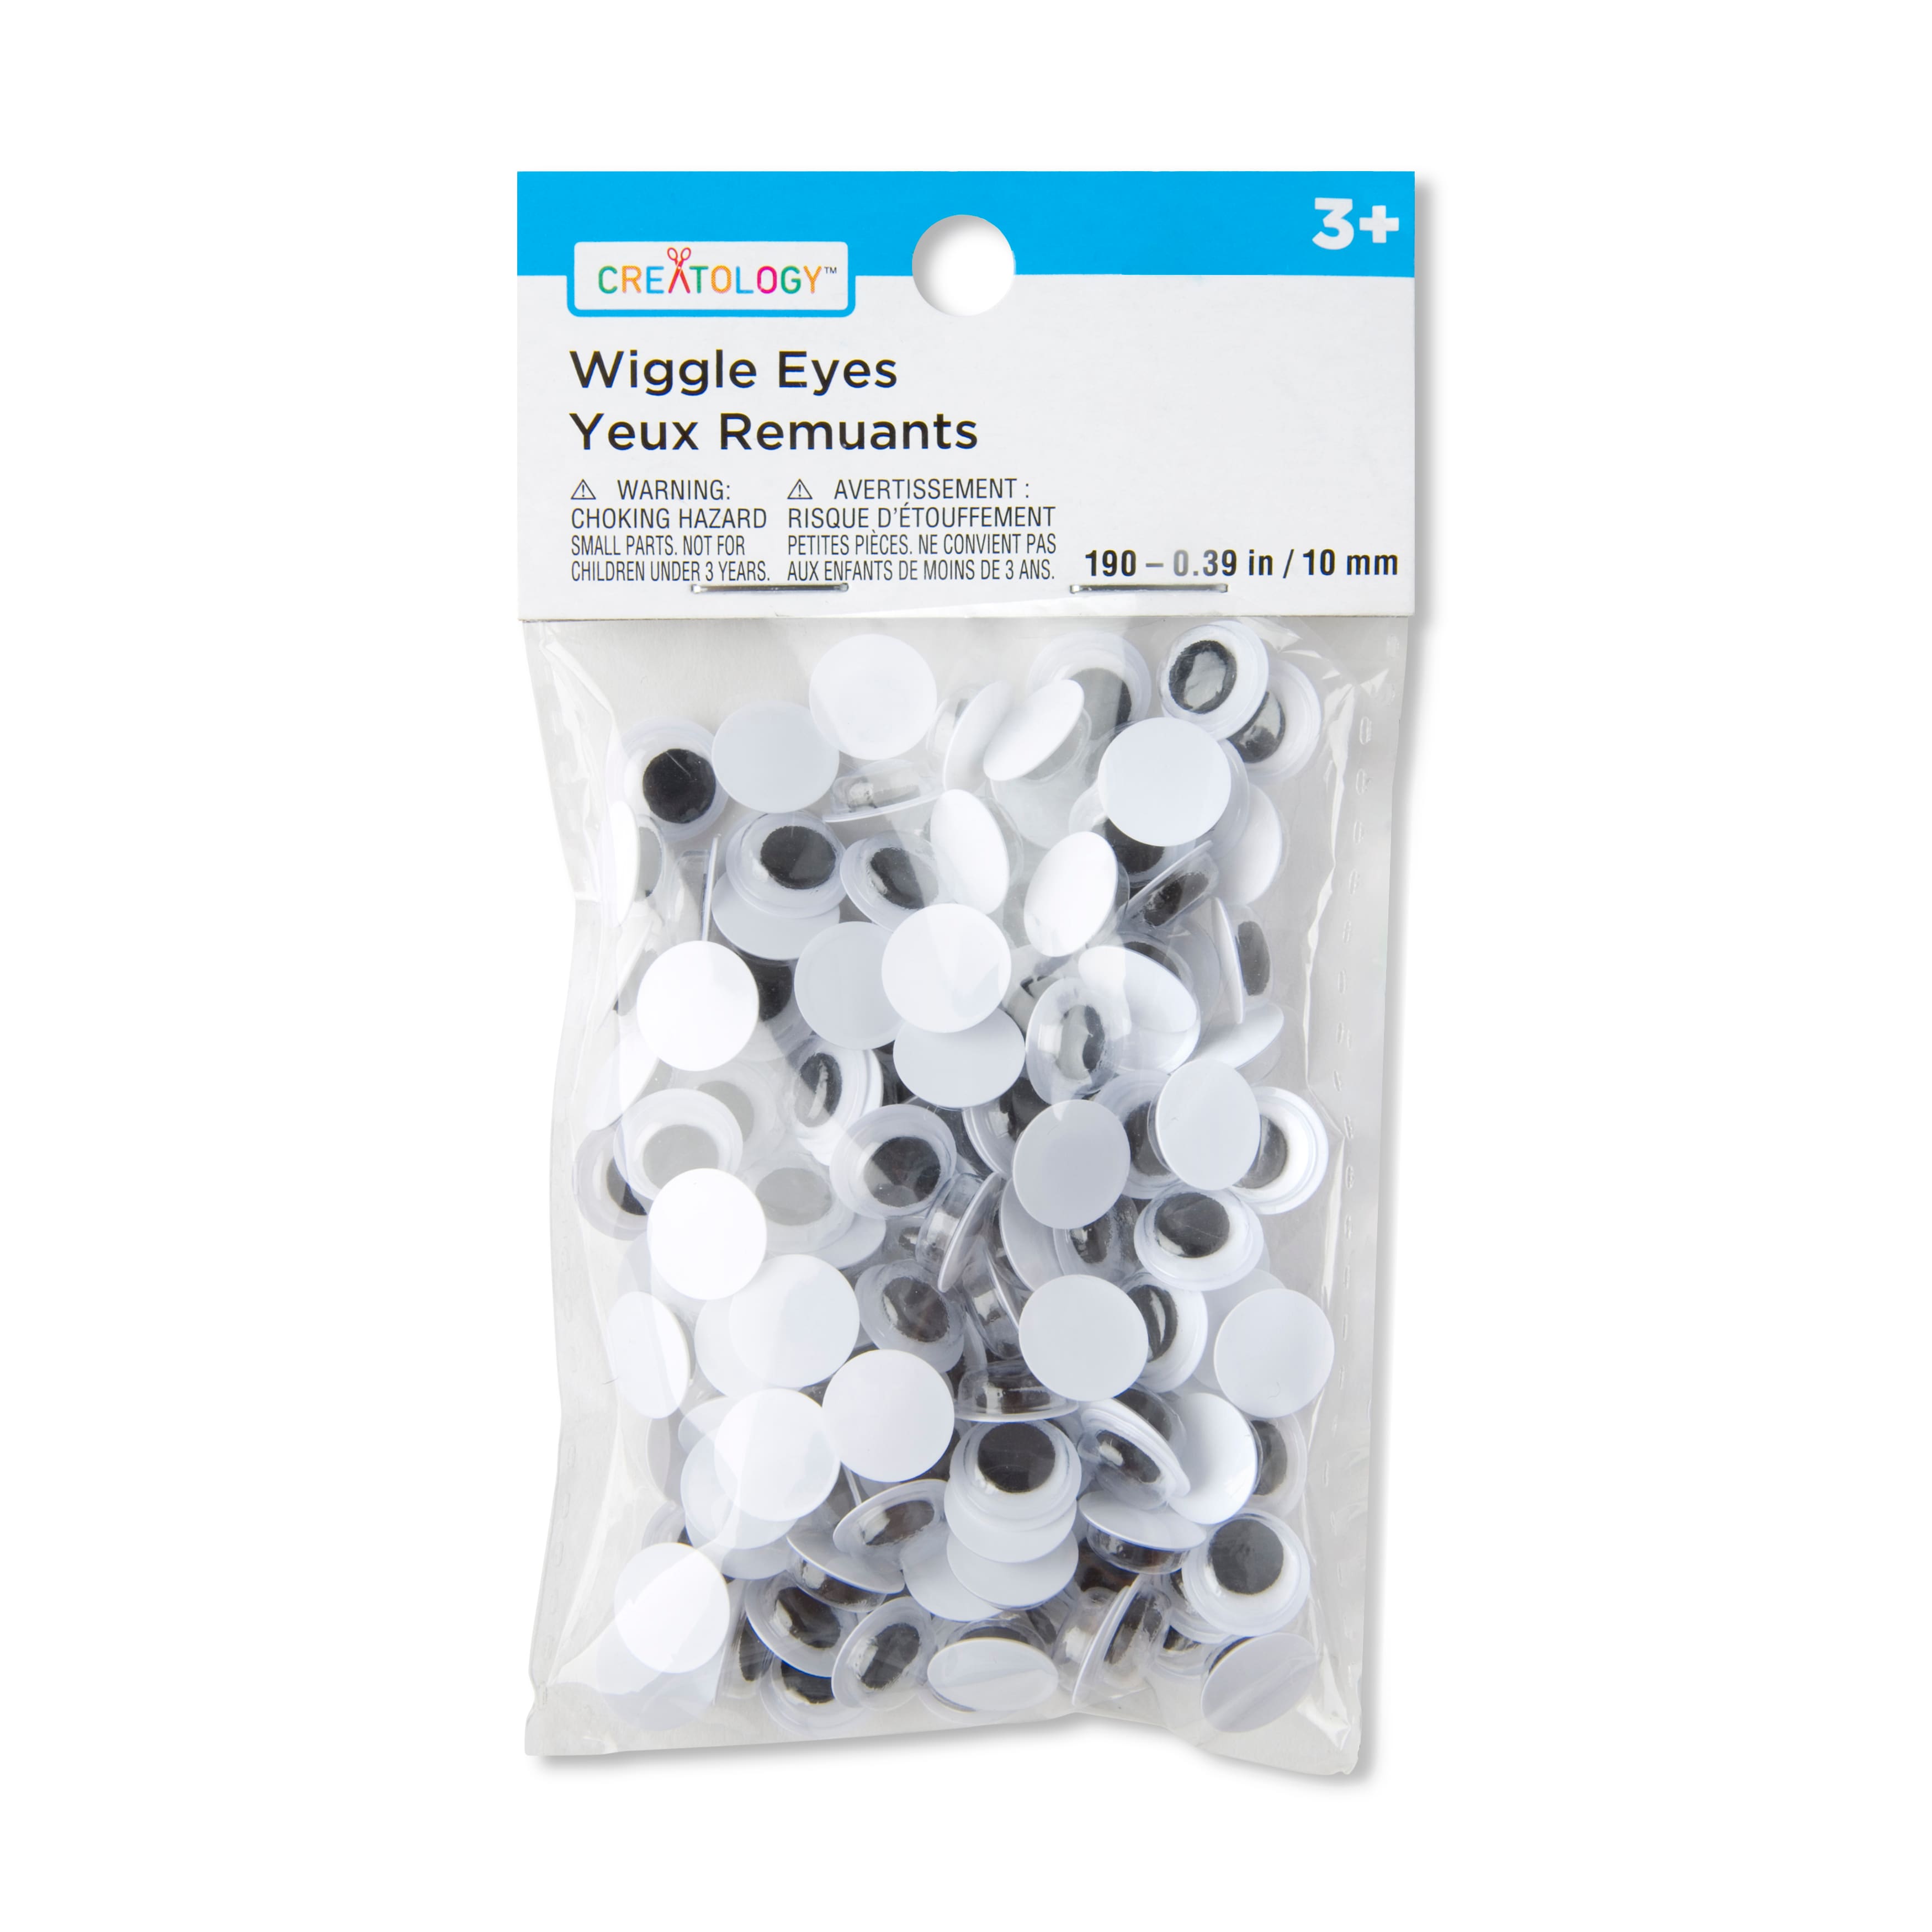 12 Packs: 190 ct. (2,280 total) 10 mm Flat Back Wiggle Eyes by Creatology&#x2122;